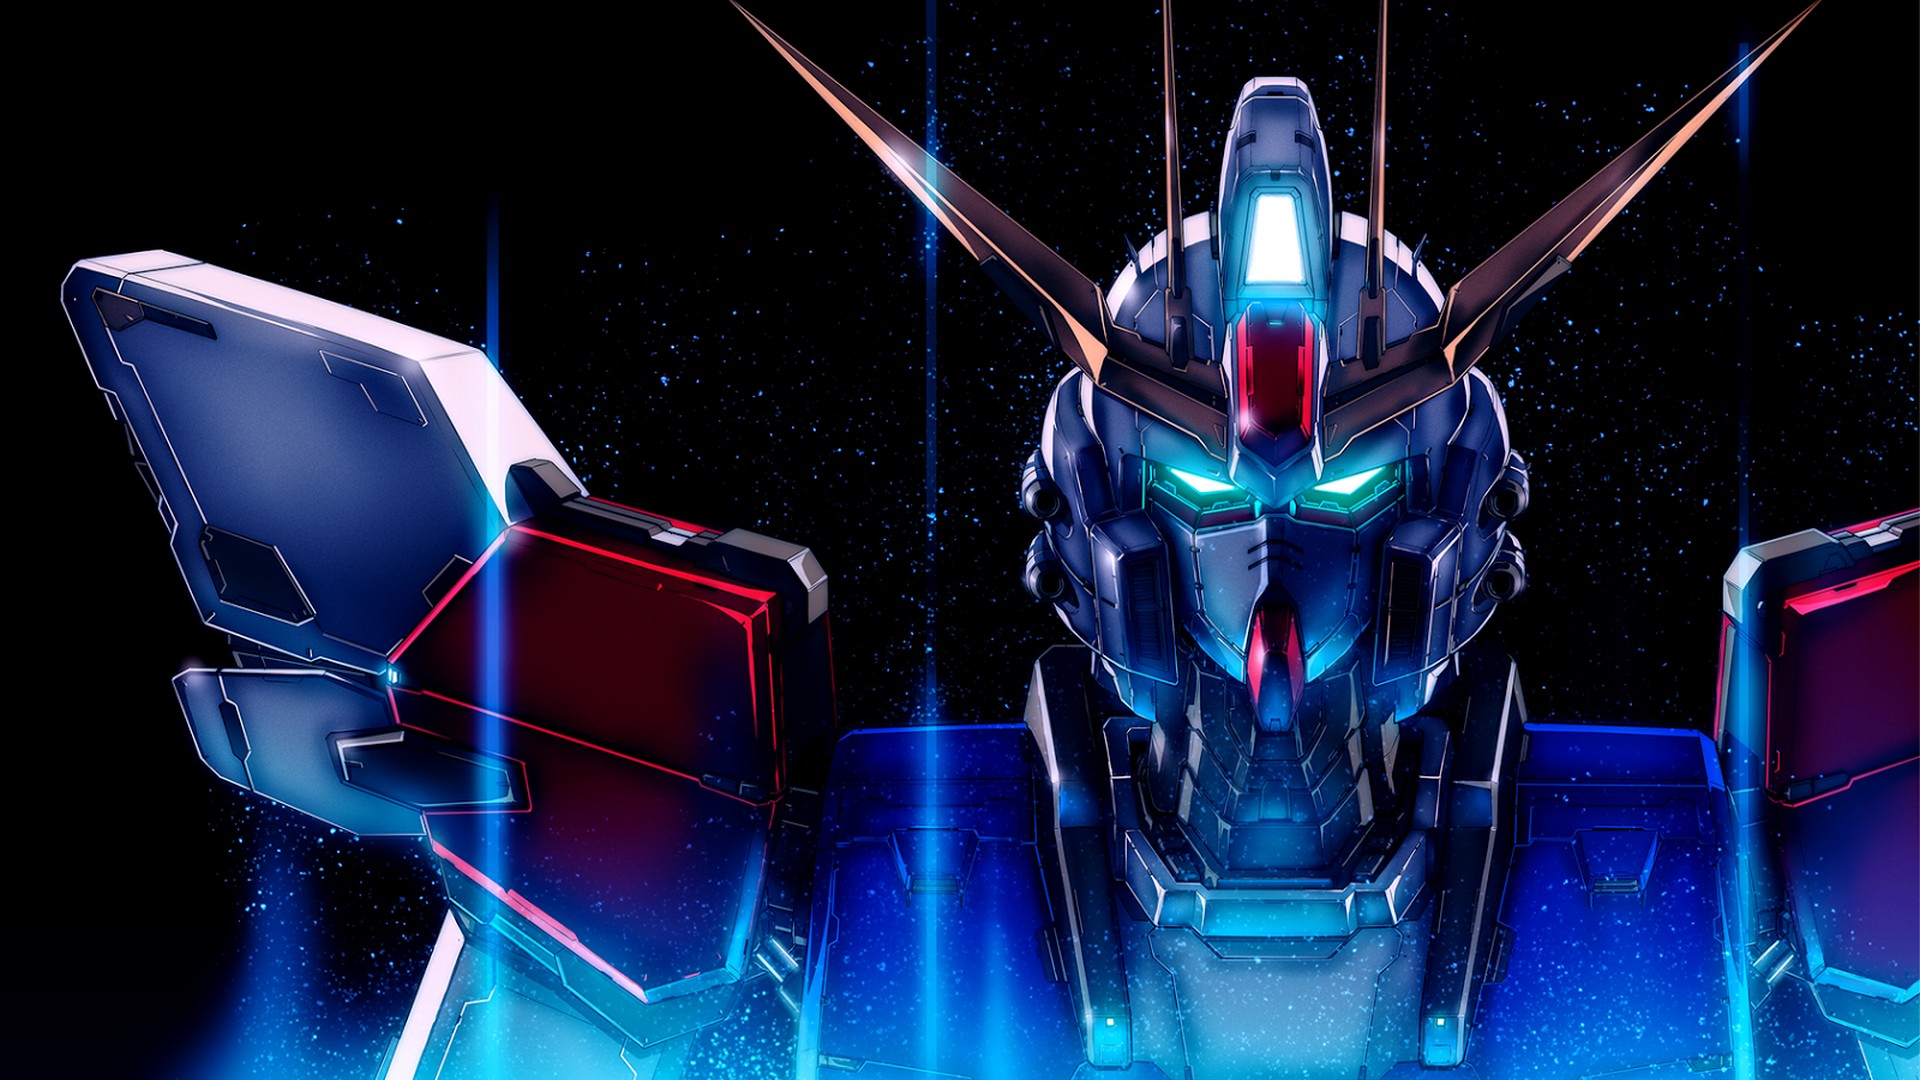 Gundam Desktop Backgrounds With high-resolution 1920X1080 pixel. You can use this wallpaper for your Desktop Computer Backgrounds, Mac Wallpapers, Android Lock screen or iPhone Screensavers and another smartphone device